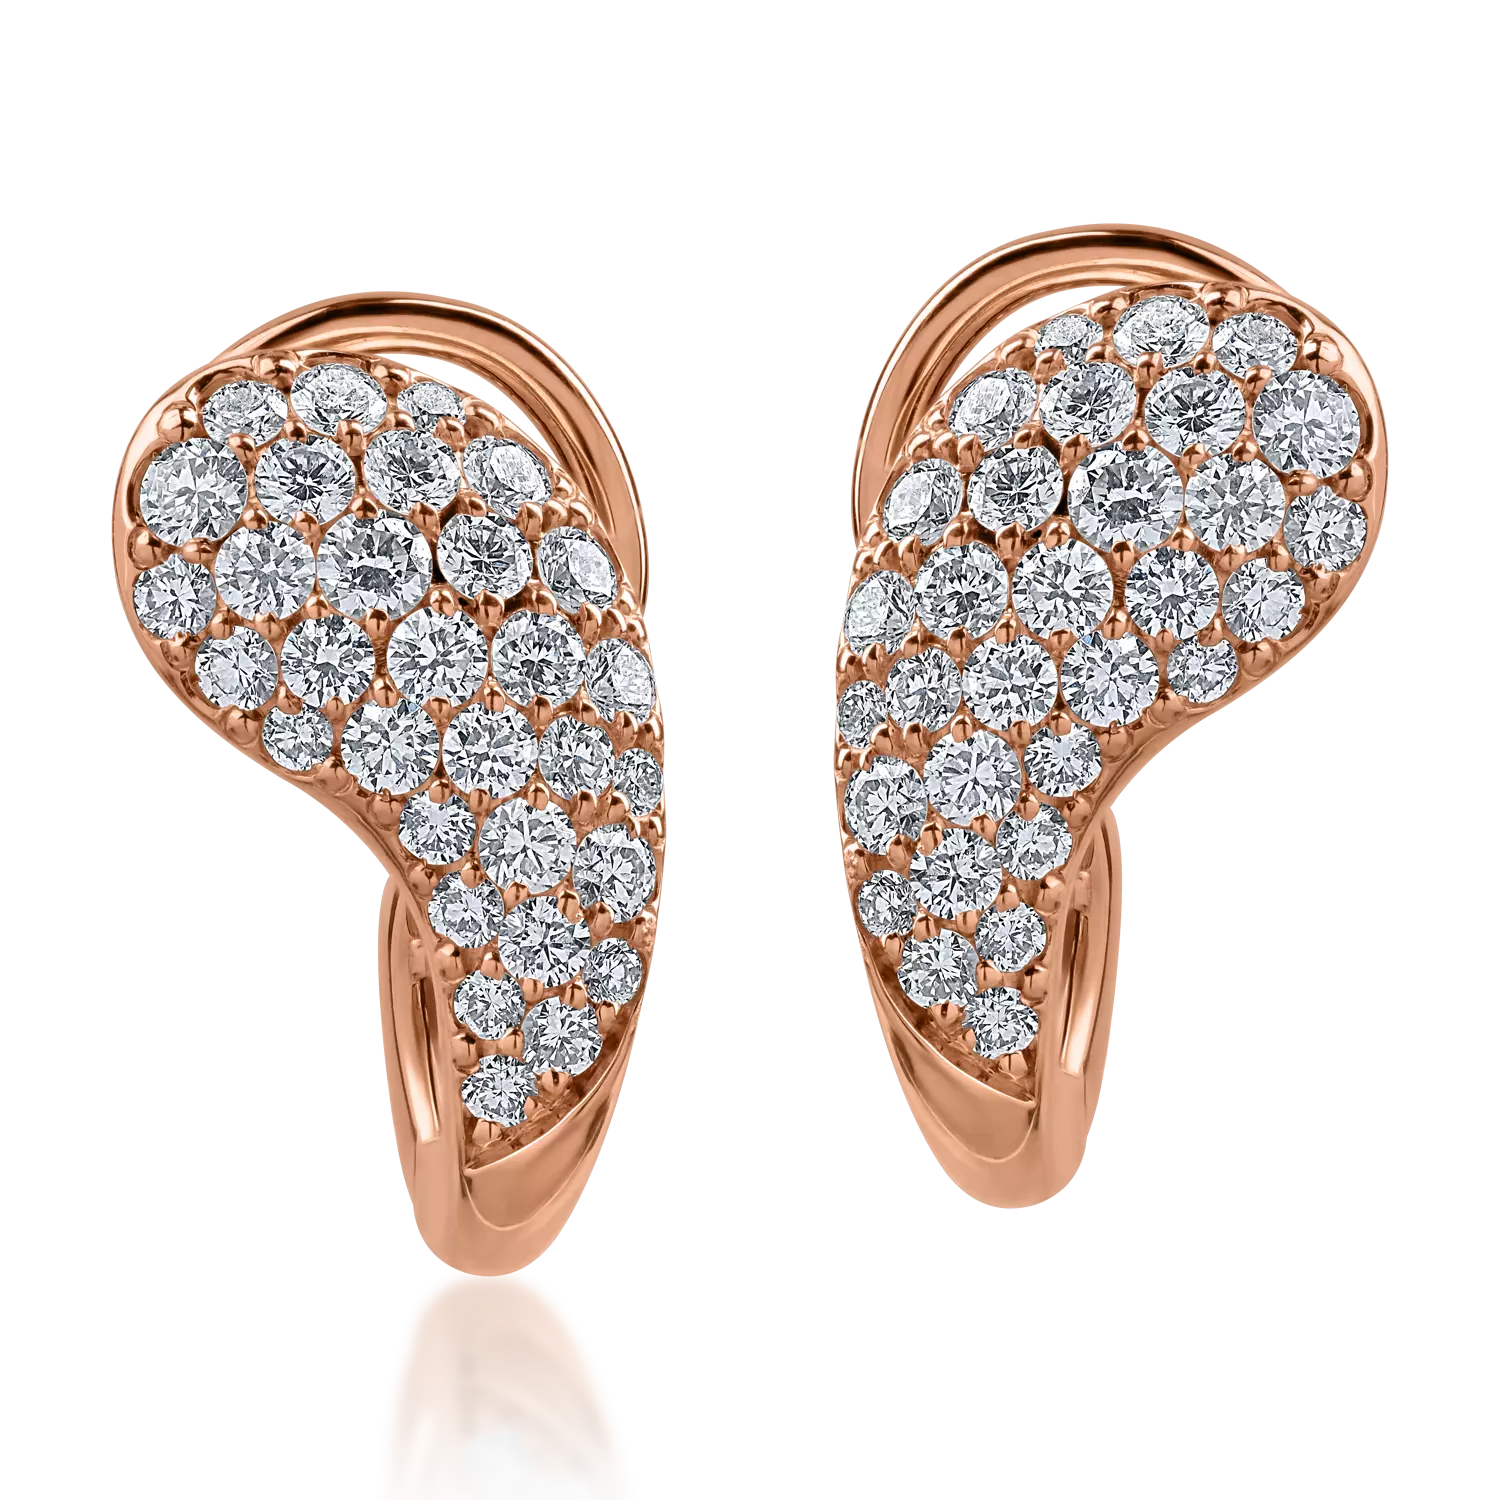 Rose gold earrings with 0.92ct diamonds